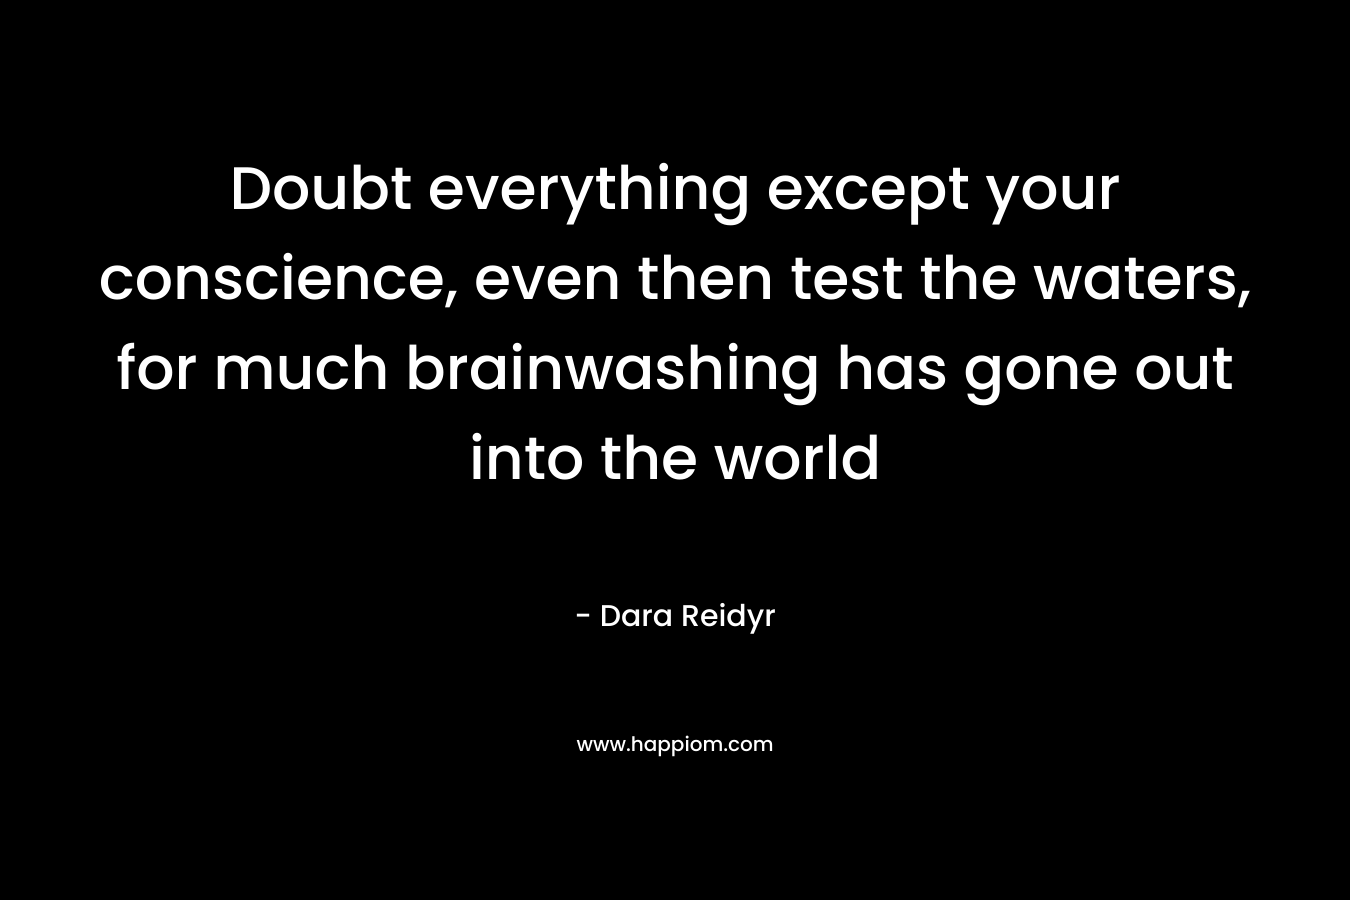 Doubt everything except your conscience, even then test the waters, for much brainwashing has gone out into the world